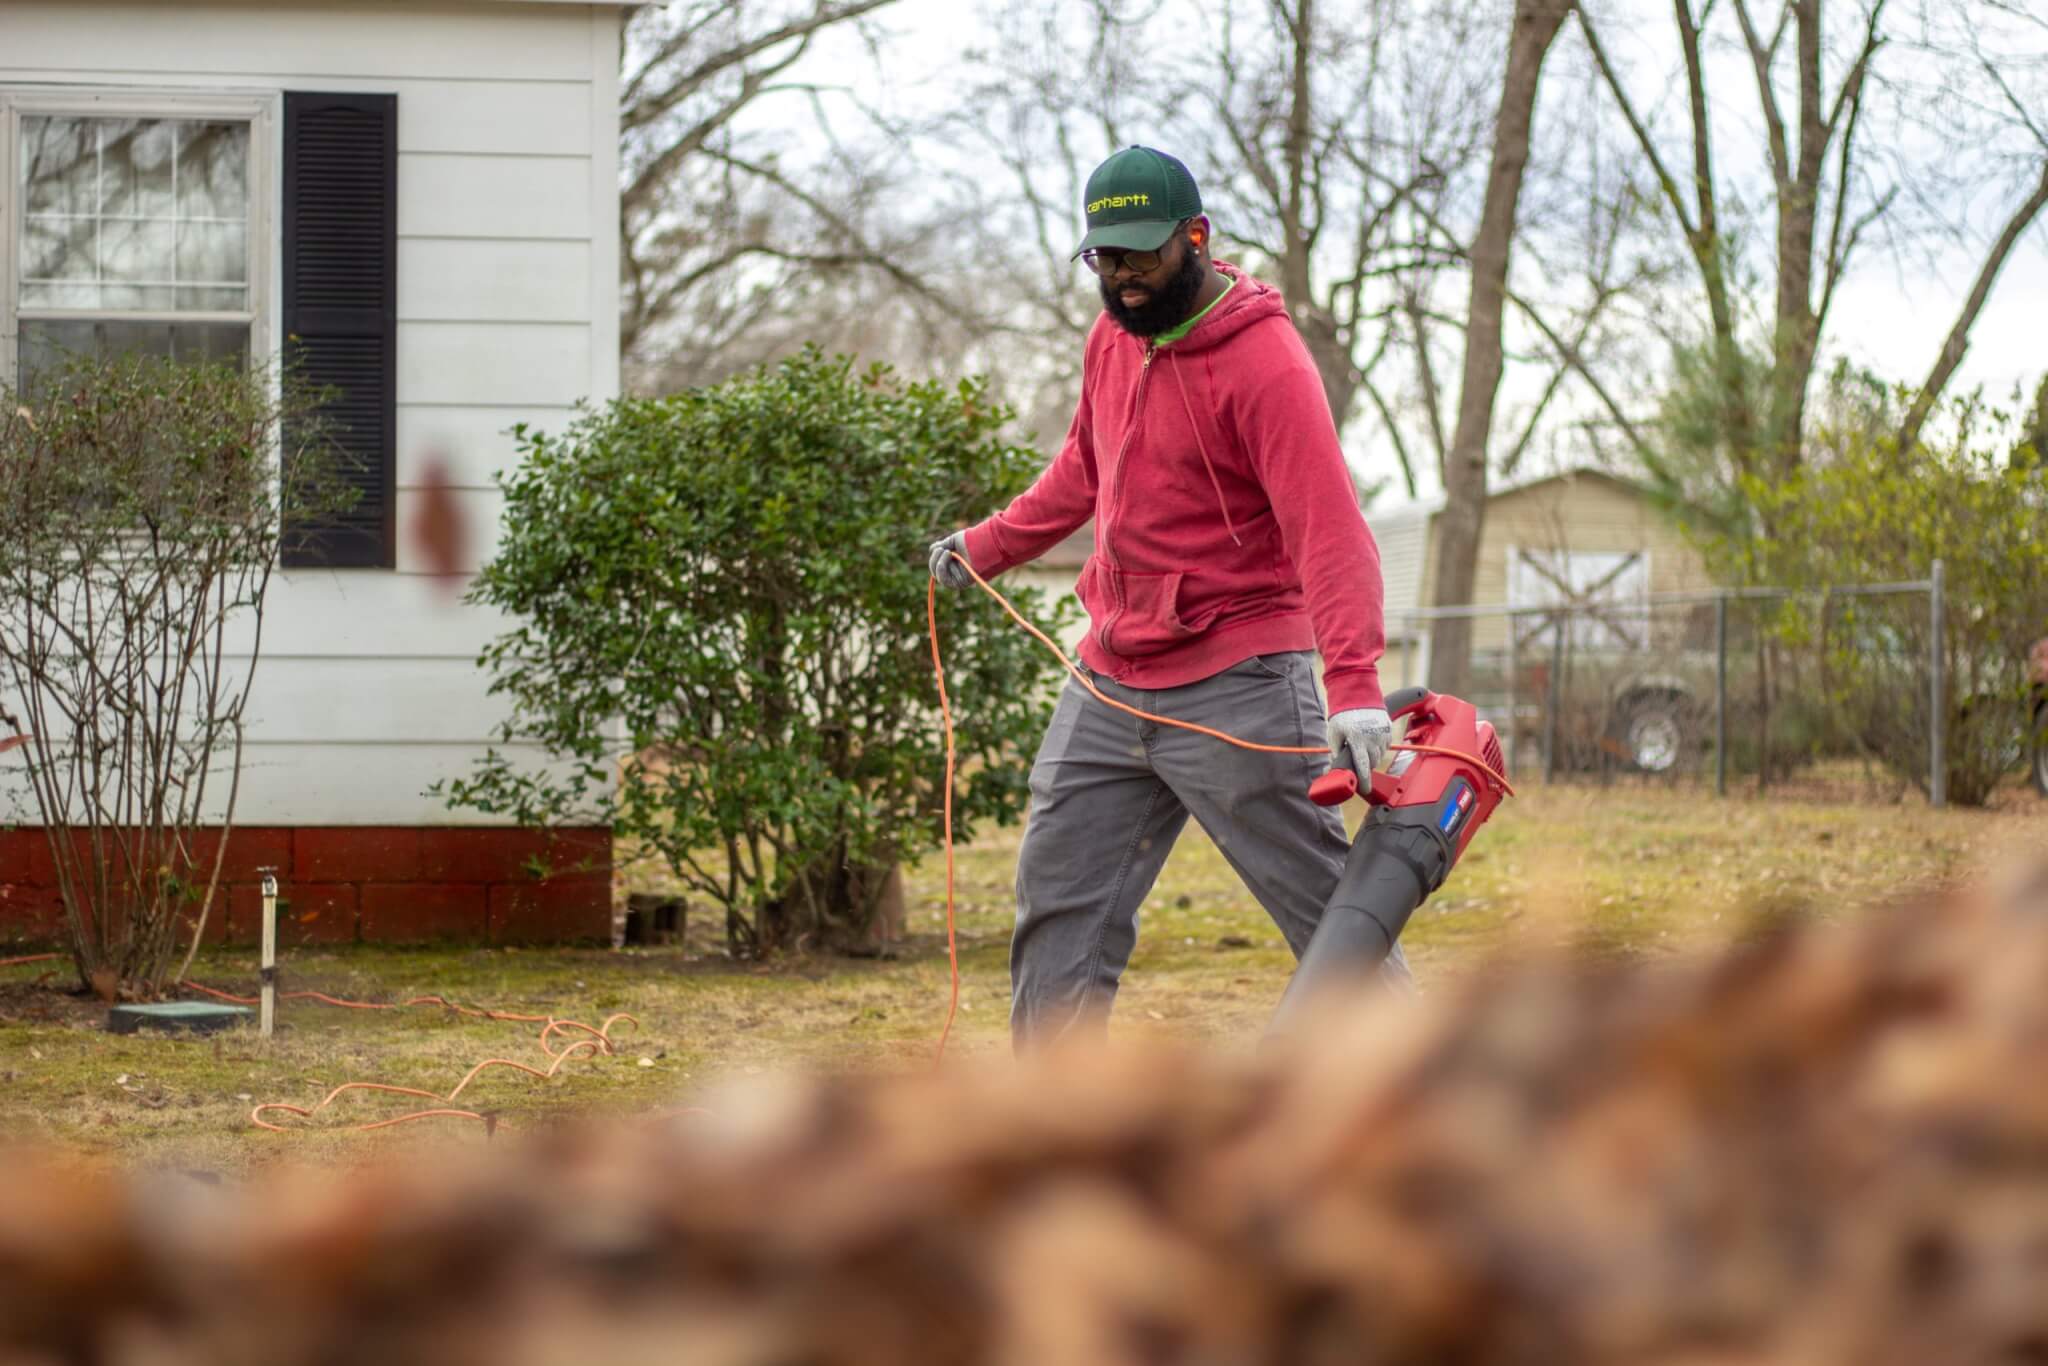 Man doing yard work, blowing leaves with leaf blower